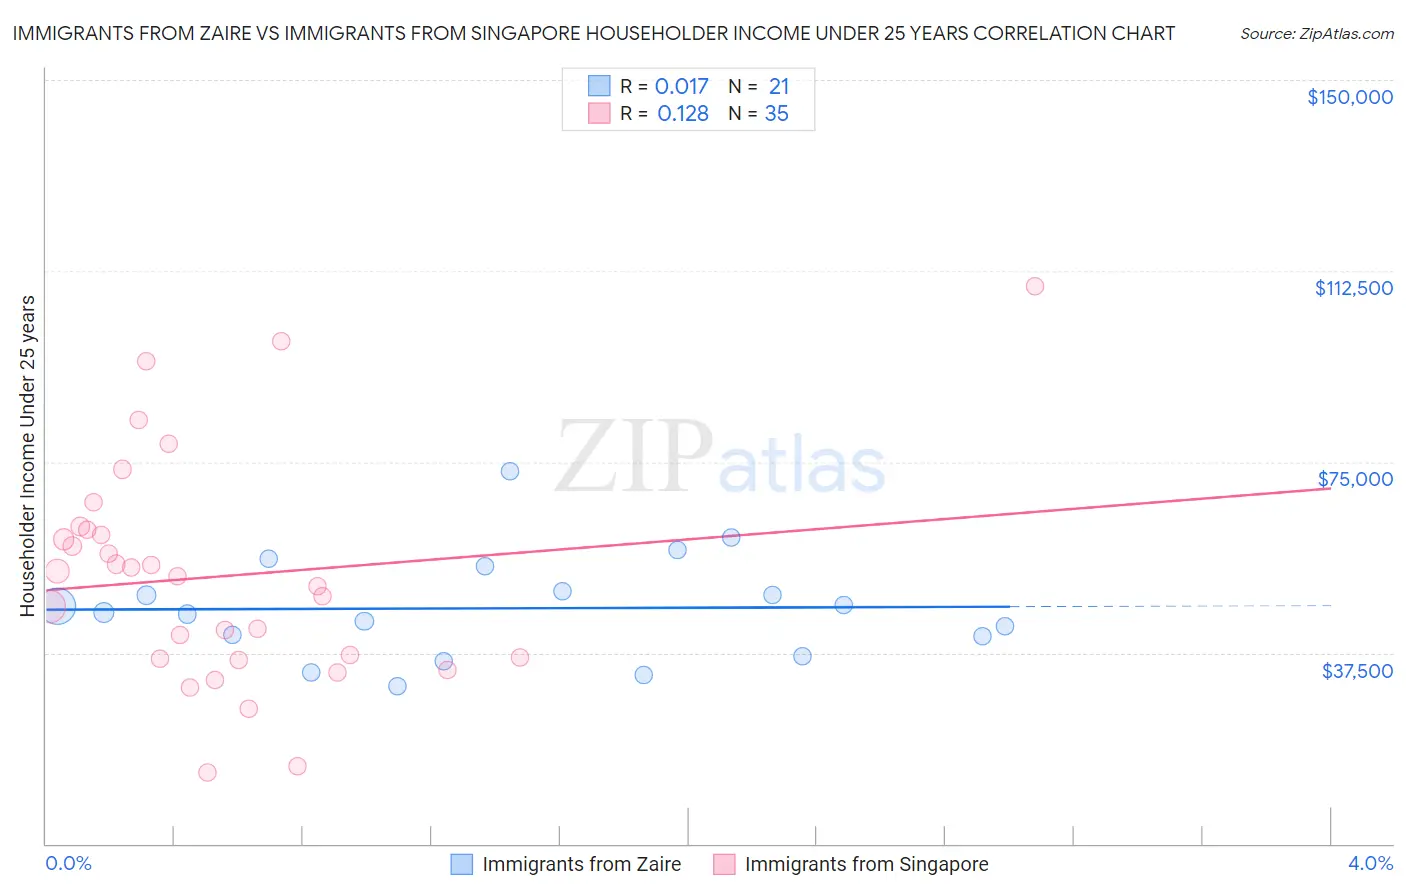 Immigrants from Zaire vs Immigrants from Singapore Householder Income Under 25 years